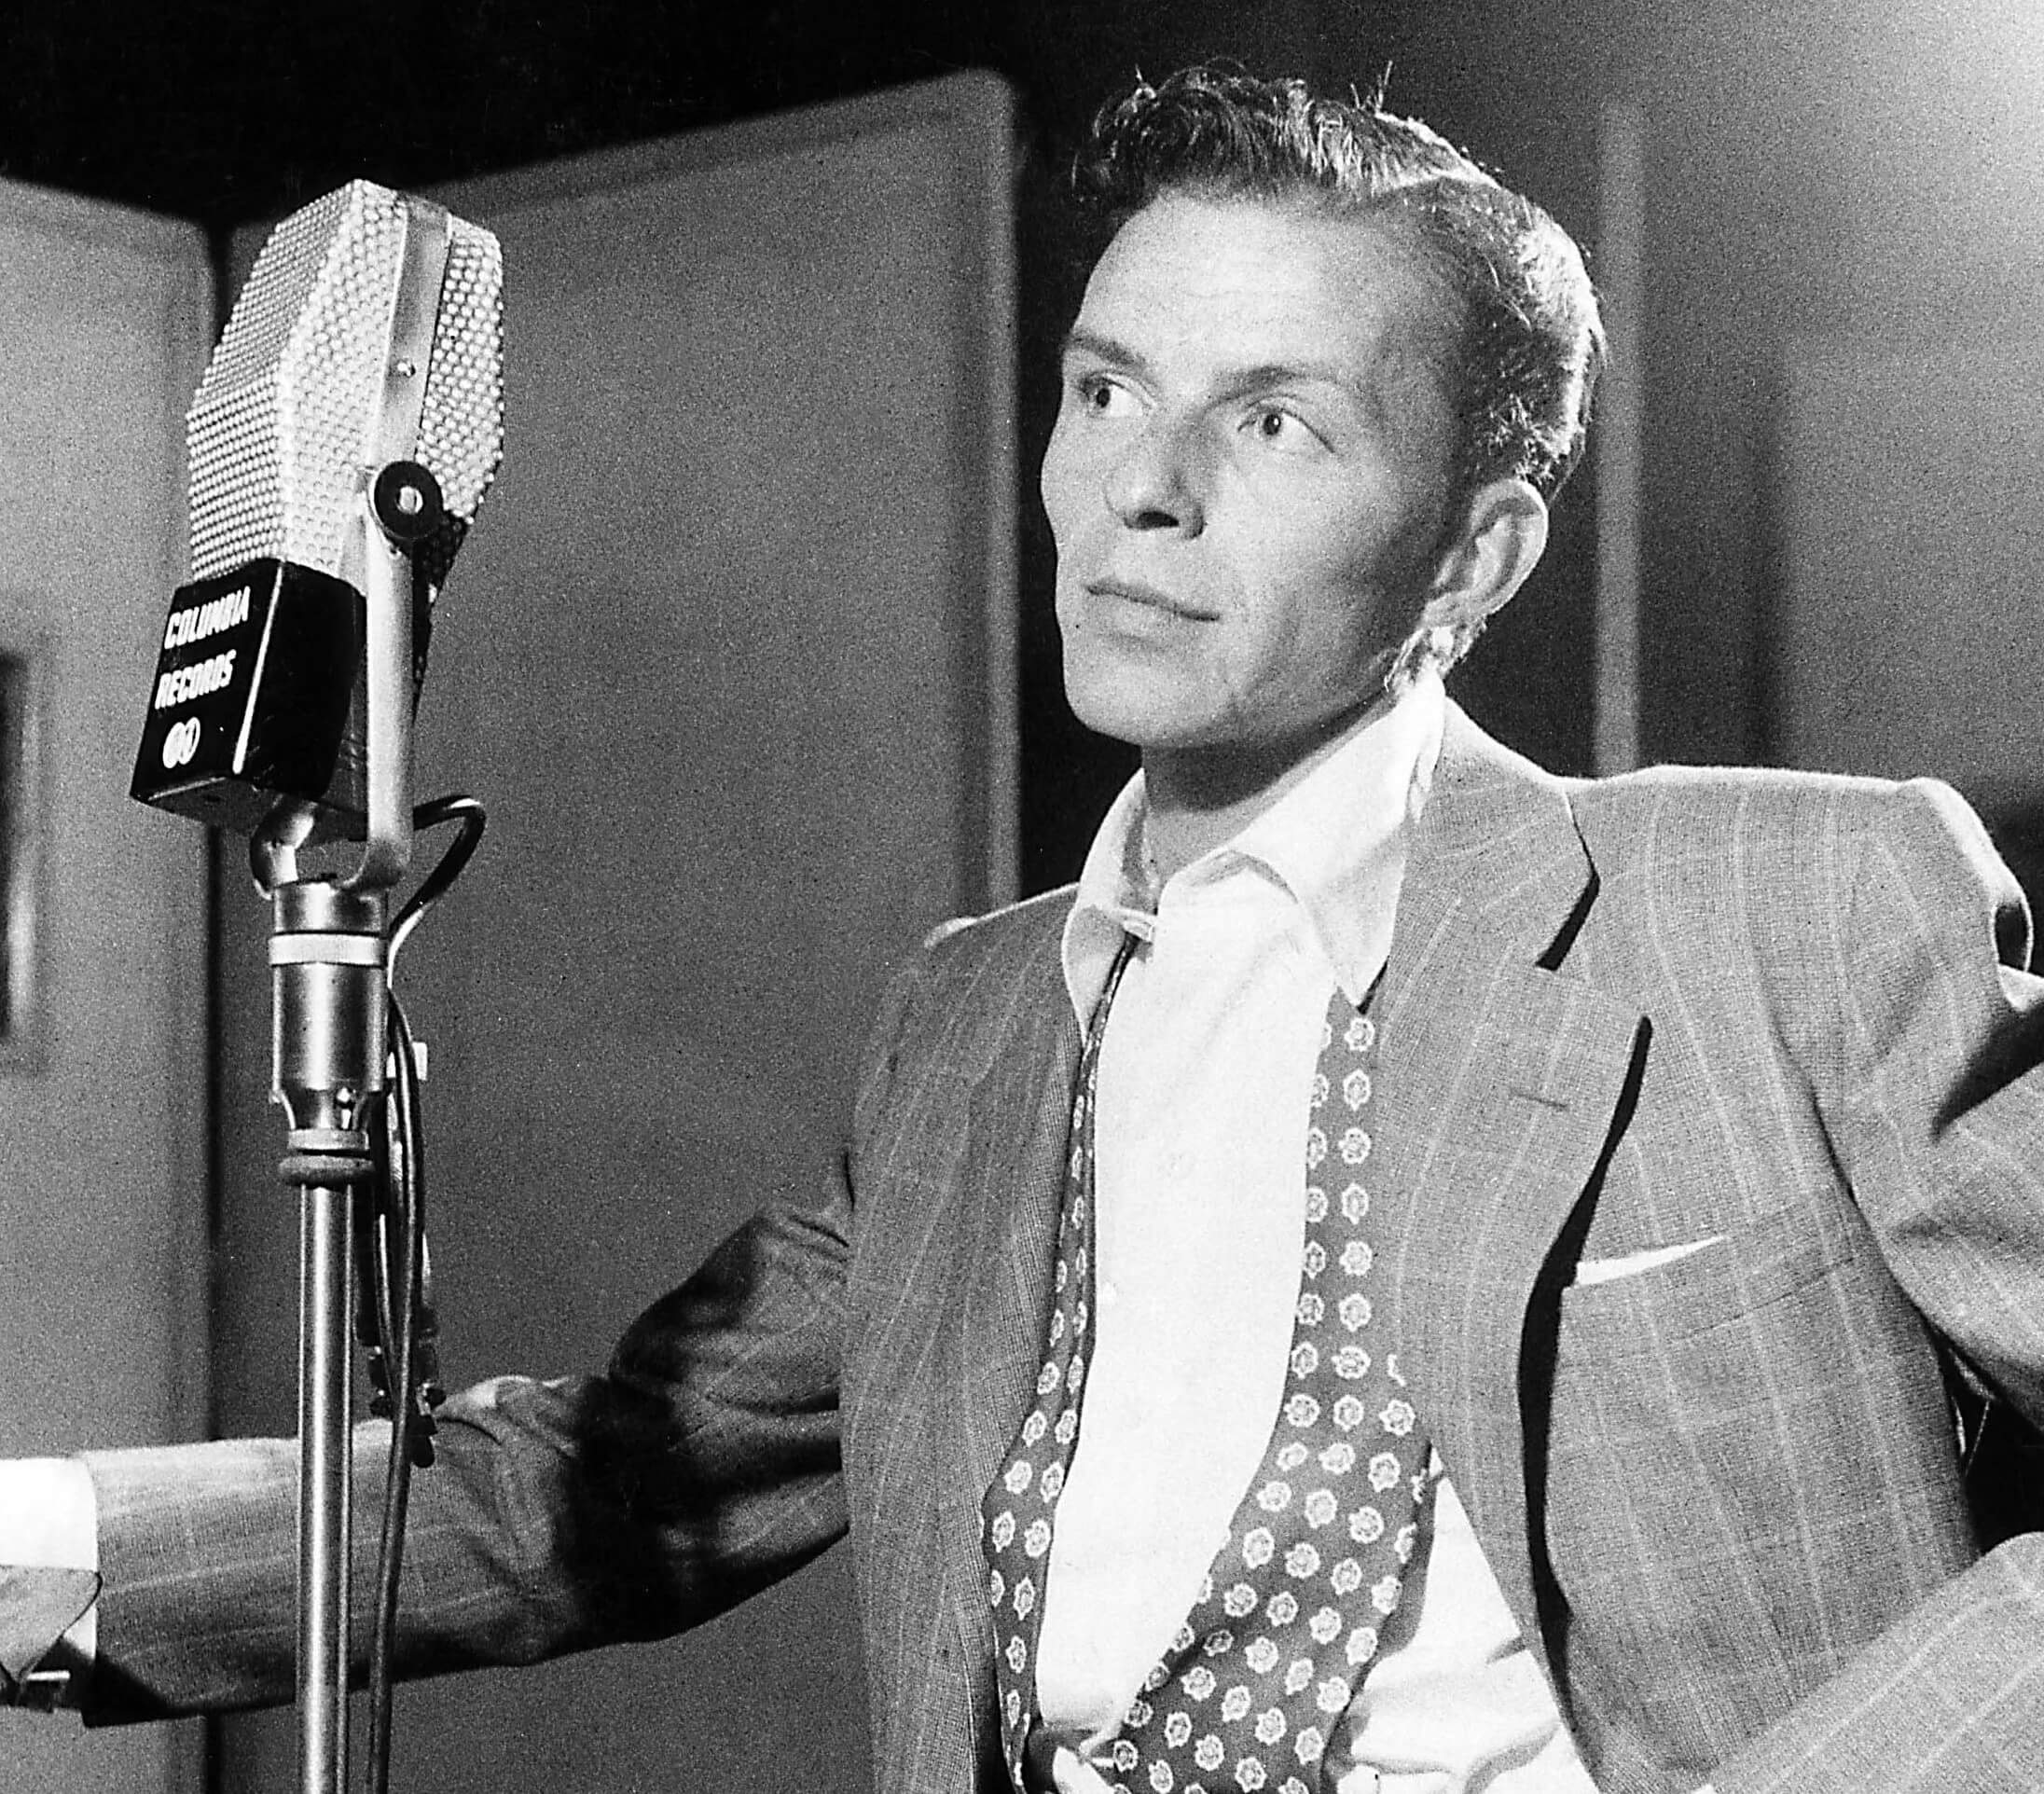 "That's Life" singer Frank Sinatra near a microphone